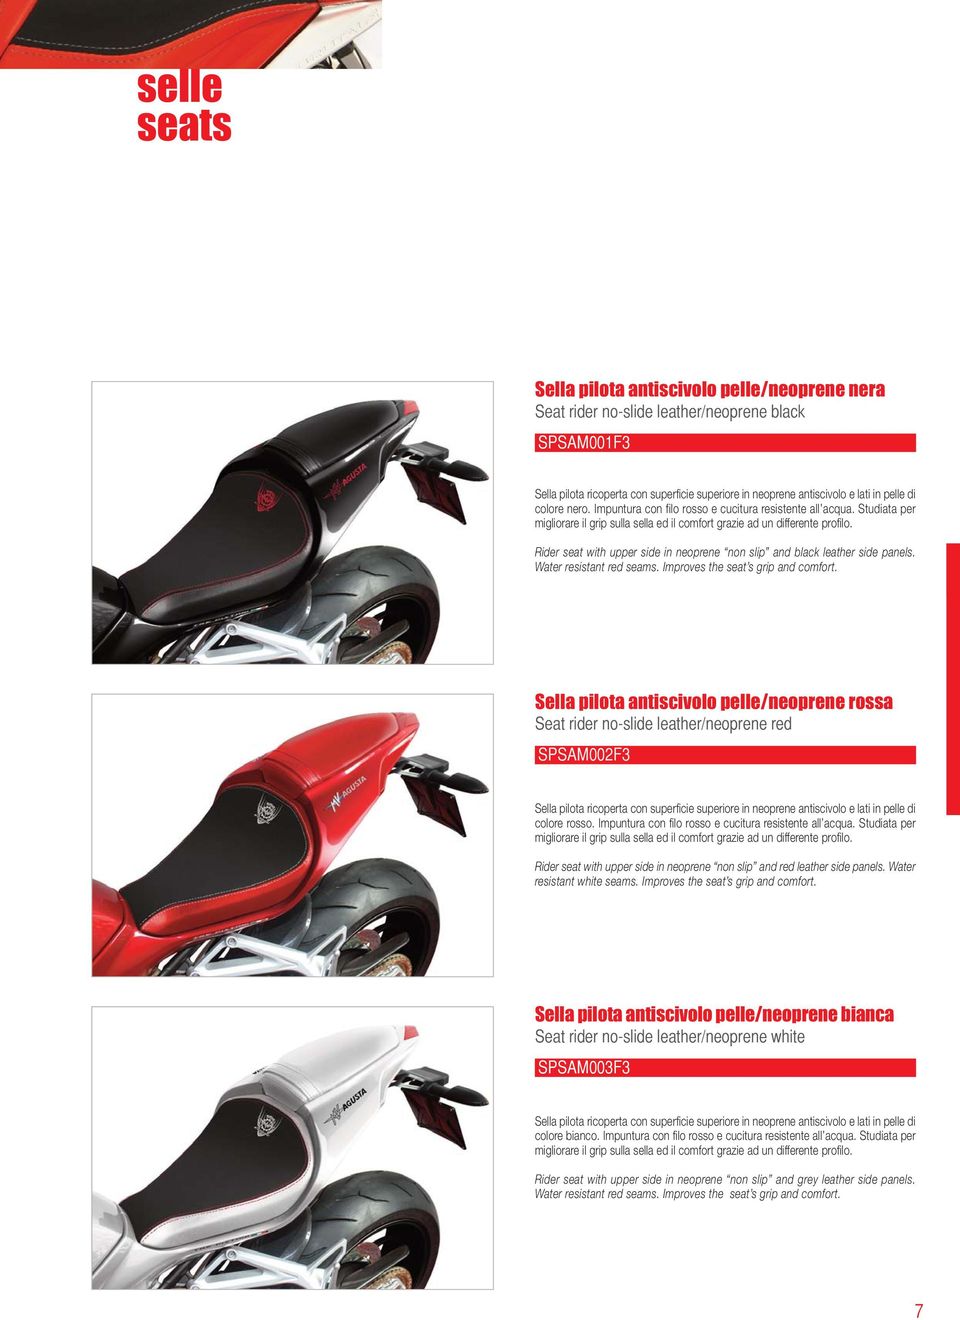 Rider seat with upper side in neoprene non slip and black leather side panels. Water resistant red seams. Improves the seat s grip and comfort.